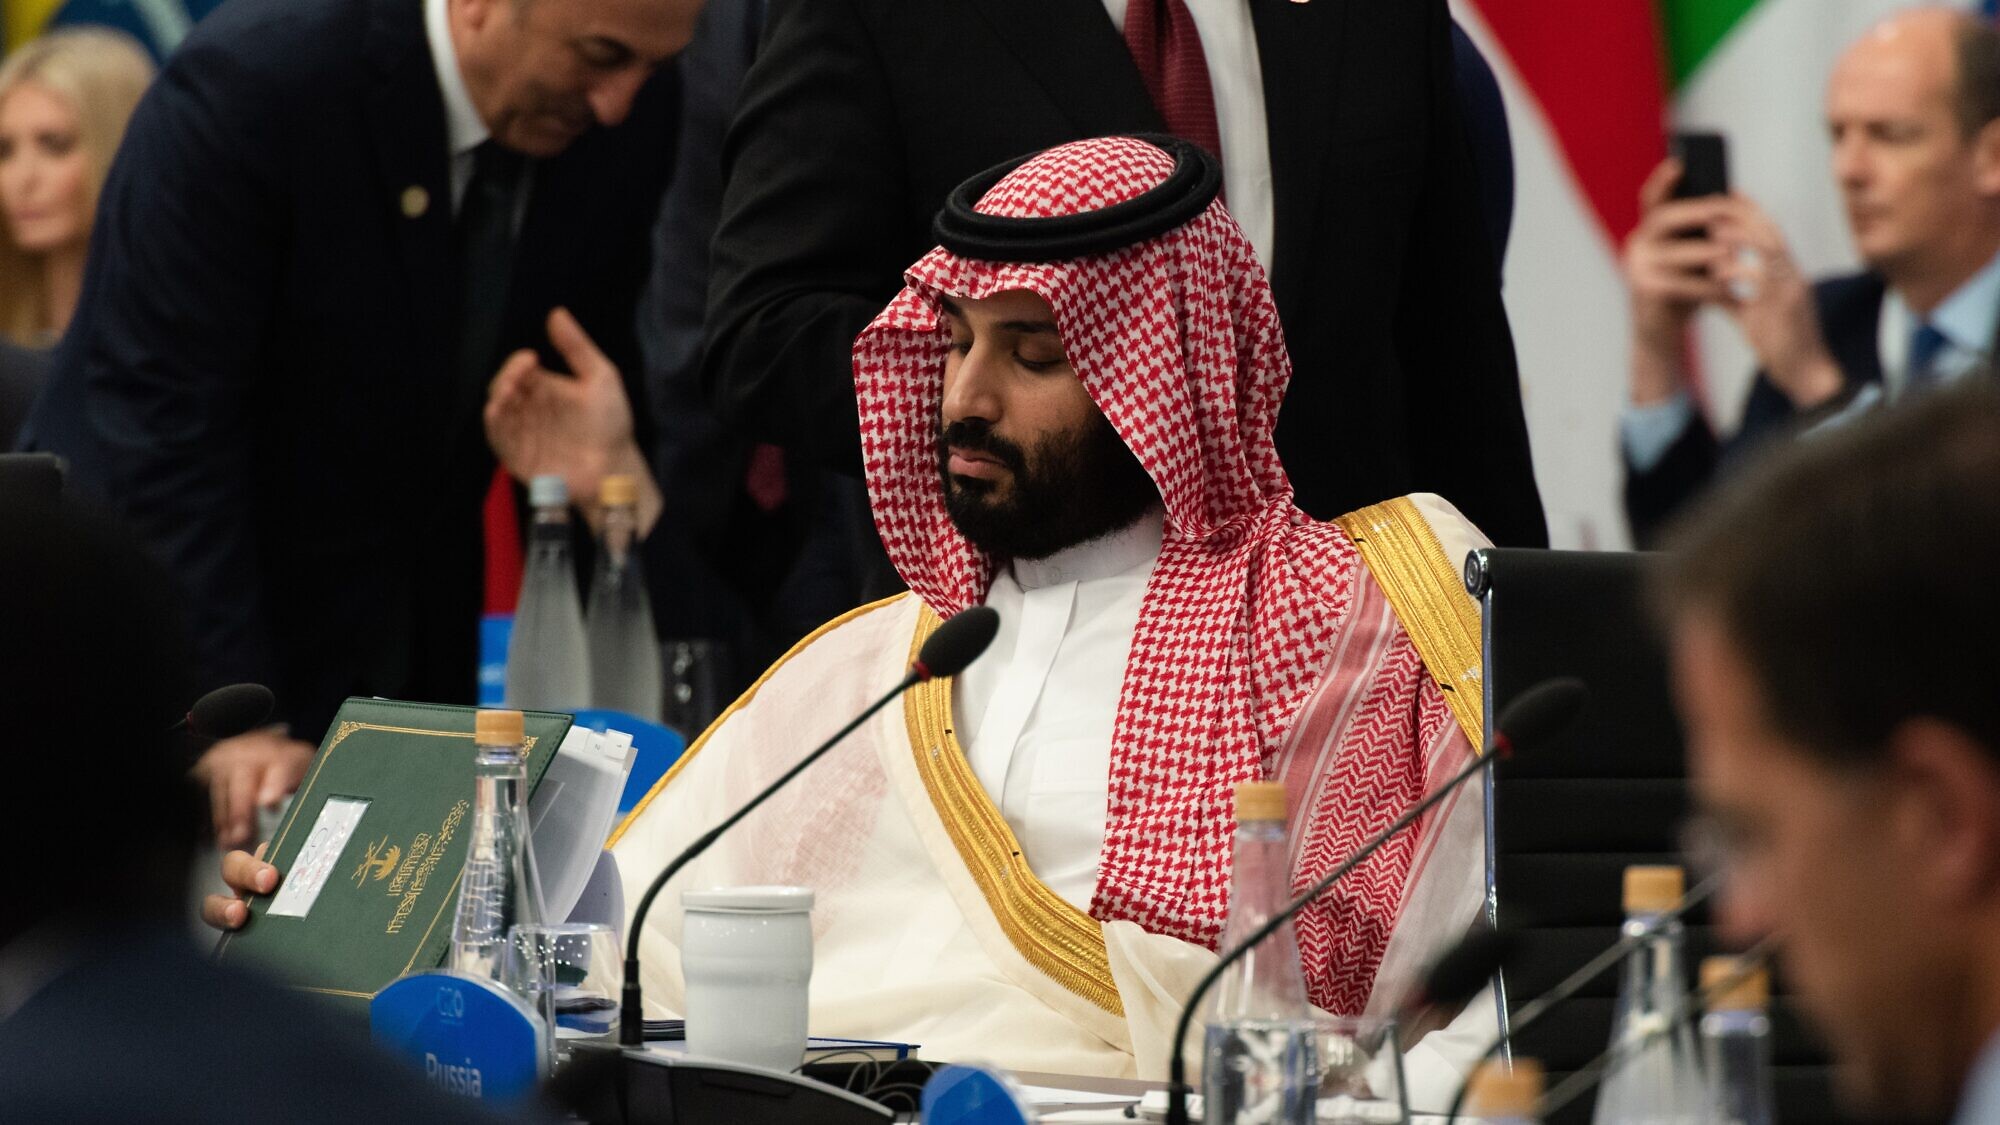 Saudi Arabia Crown Prince Mohammad bin Salman at the G20 meeting in Buenos Aires, Argentina, on Nov. 20, 2018. Credit: Matias Lynch/Shutterstock.